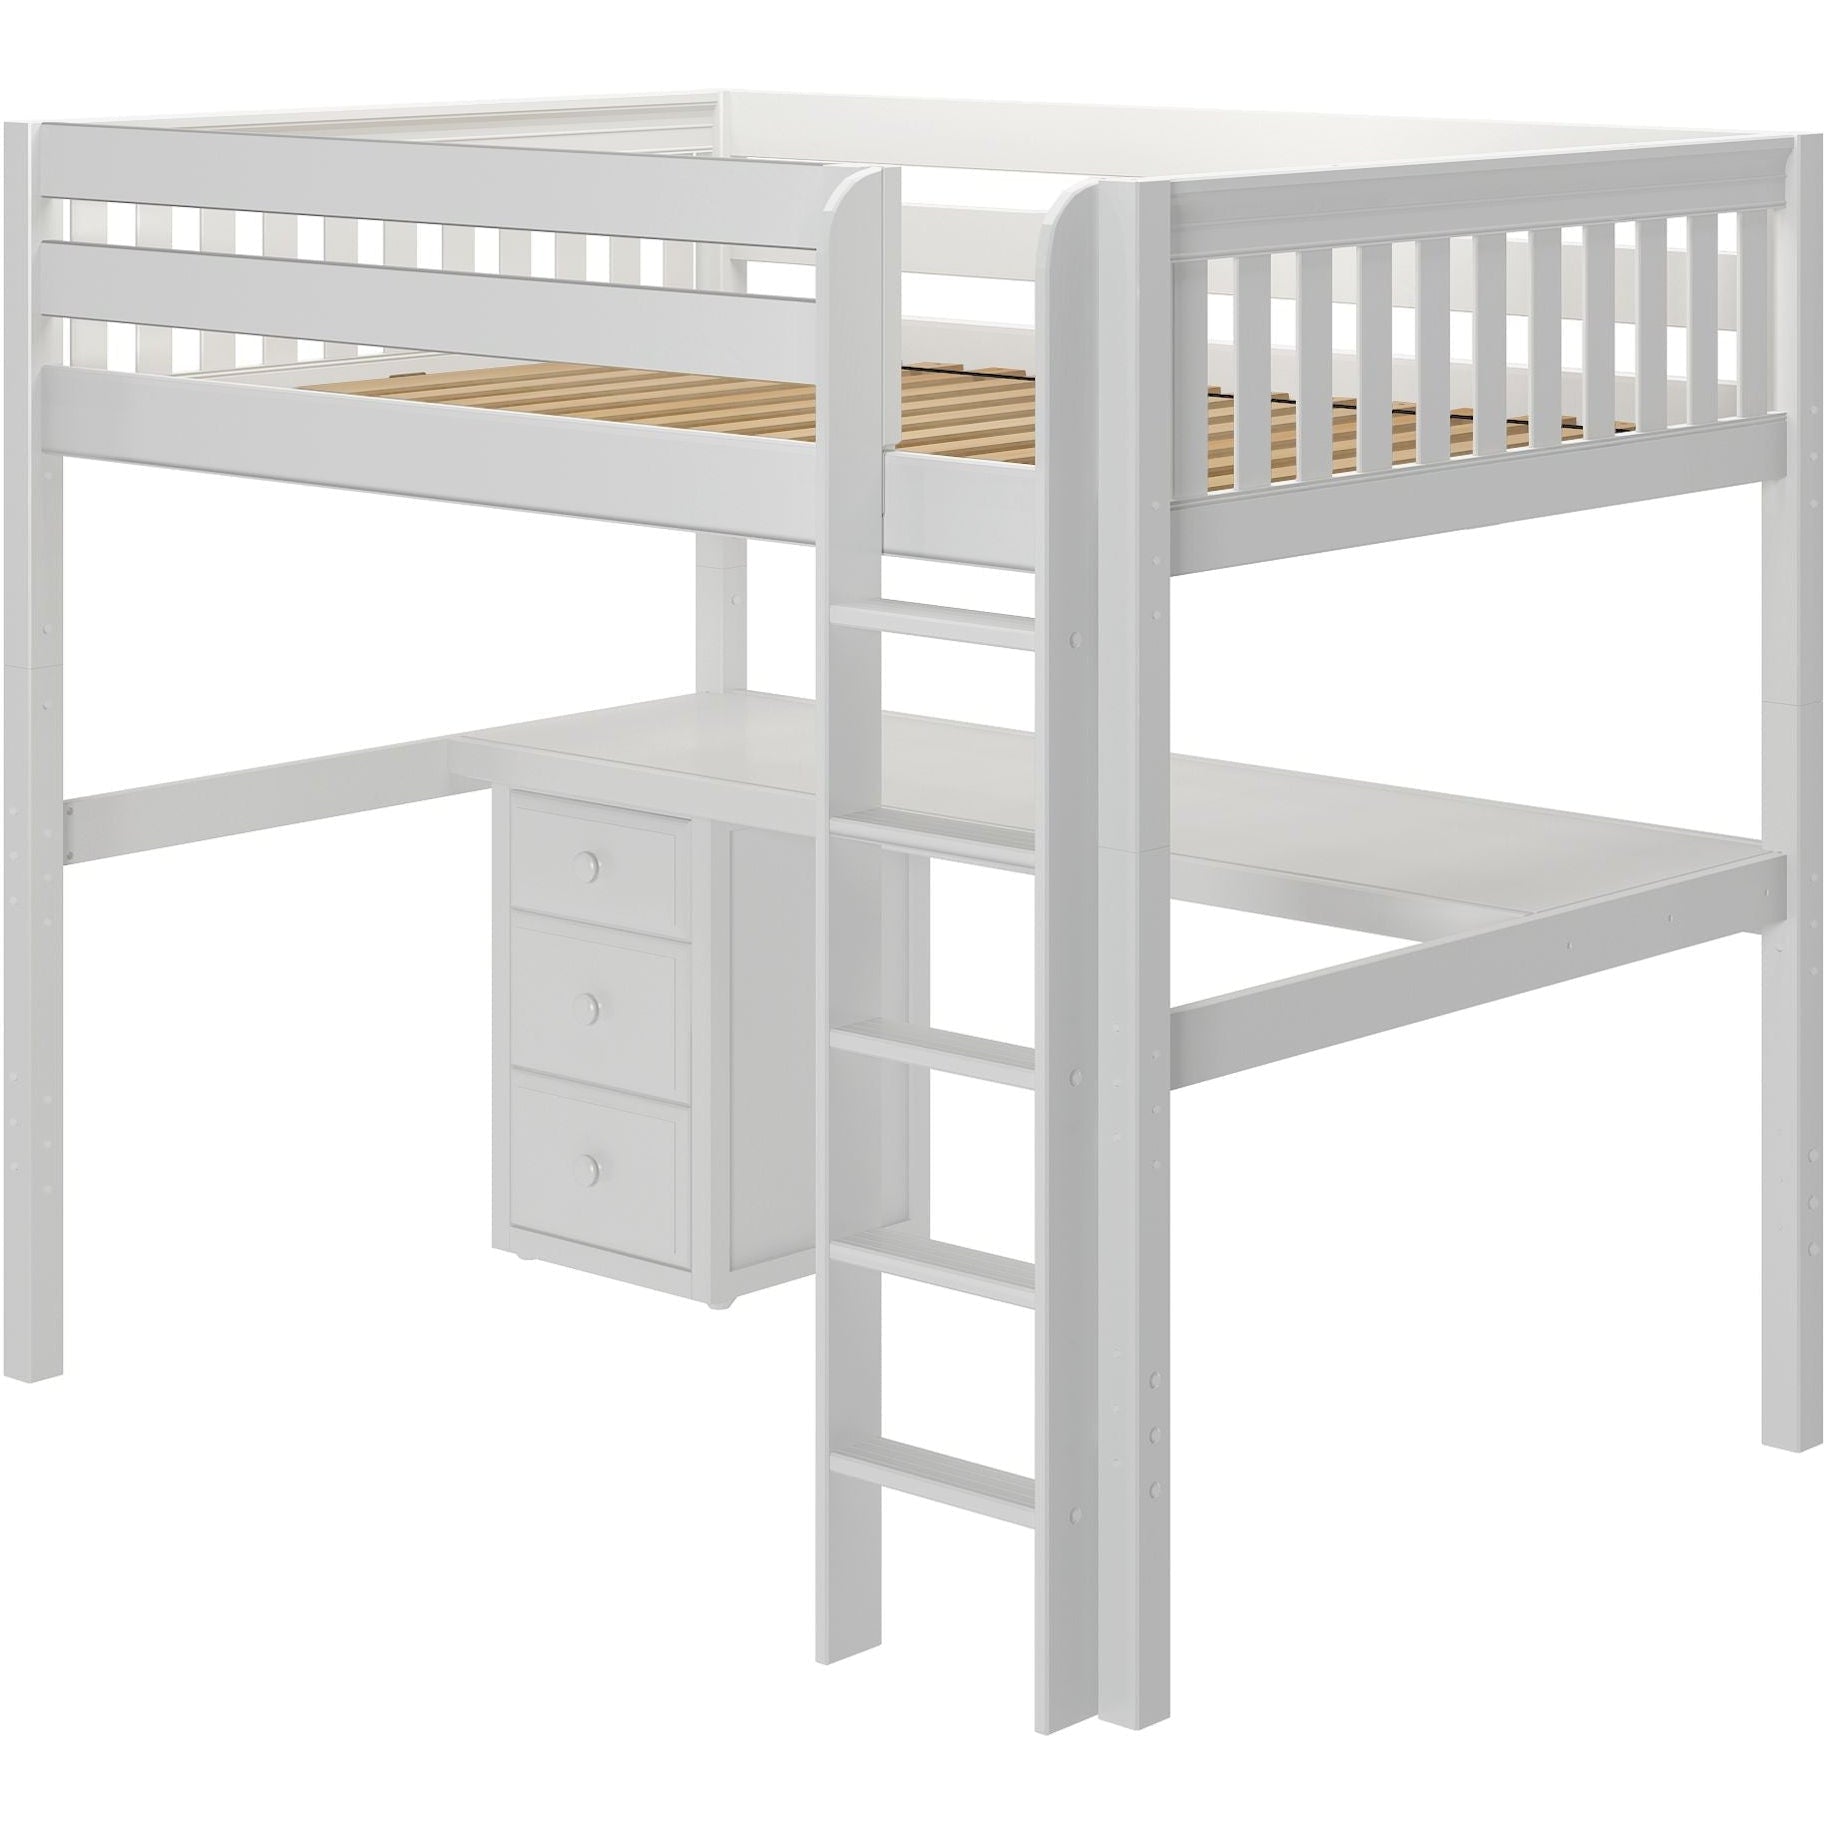 Maxtrix Full XL High Loft Bed with Straight Ladder and Long Desk